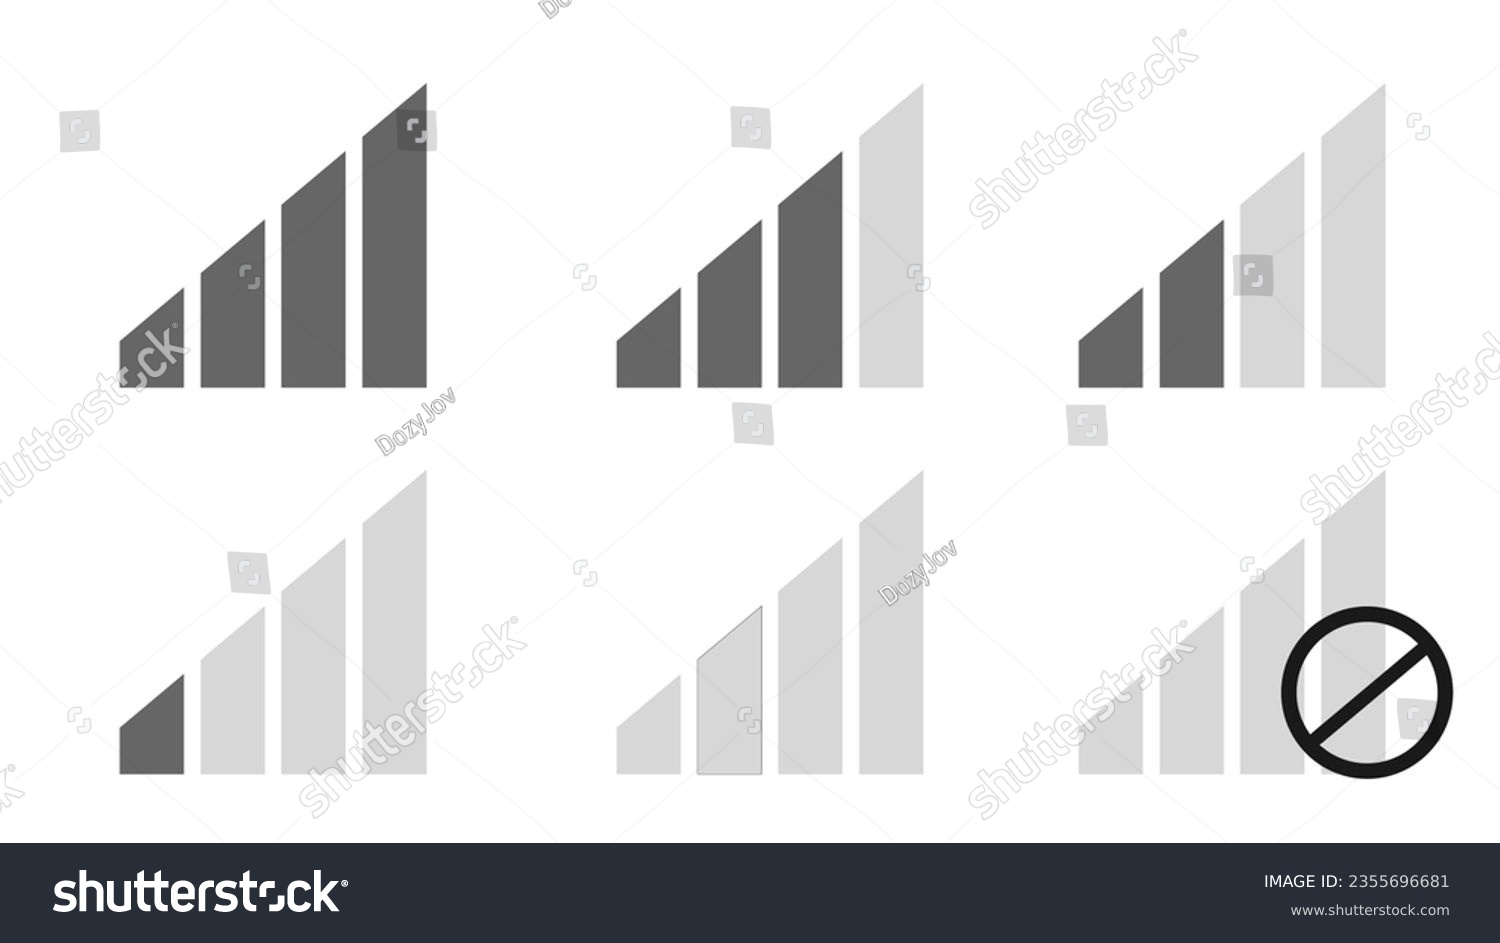 SVG of Signal reception strength simple grey icons six in a sheet svg